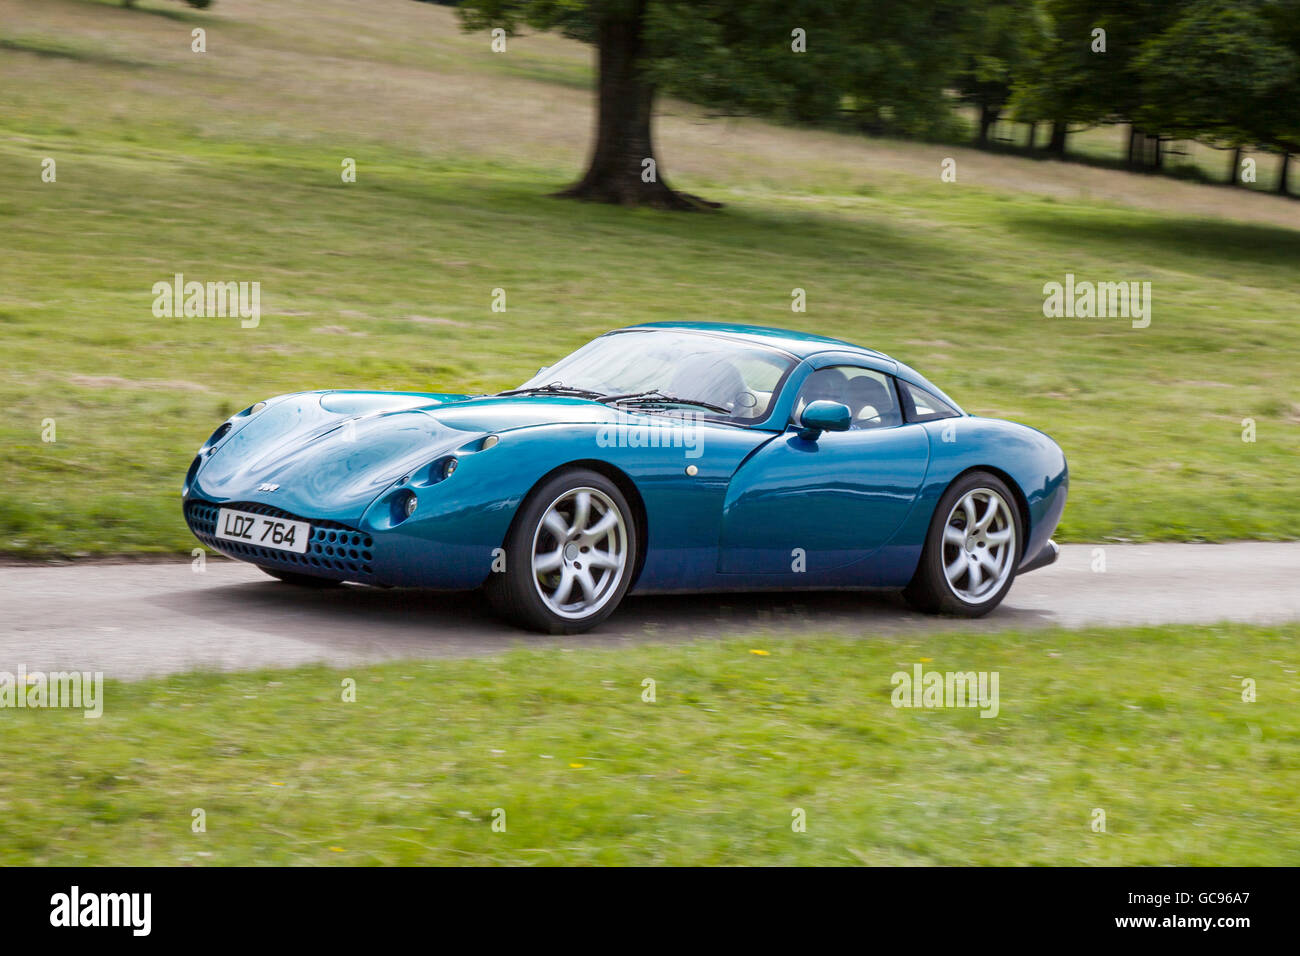 2000 blue TVR Tuscan sports car at Classic Car Rally Organised by Mark Woodward Classic Events, this is just one of 12 shows held at different locations around the country and features over 400 classic cars, and restored vehicles. Stock Photo